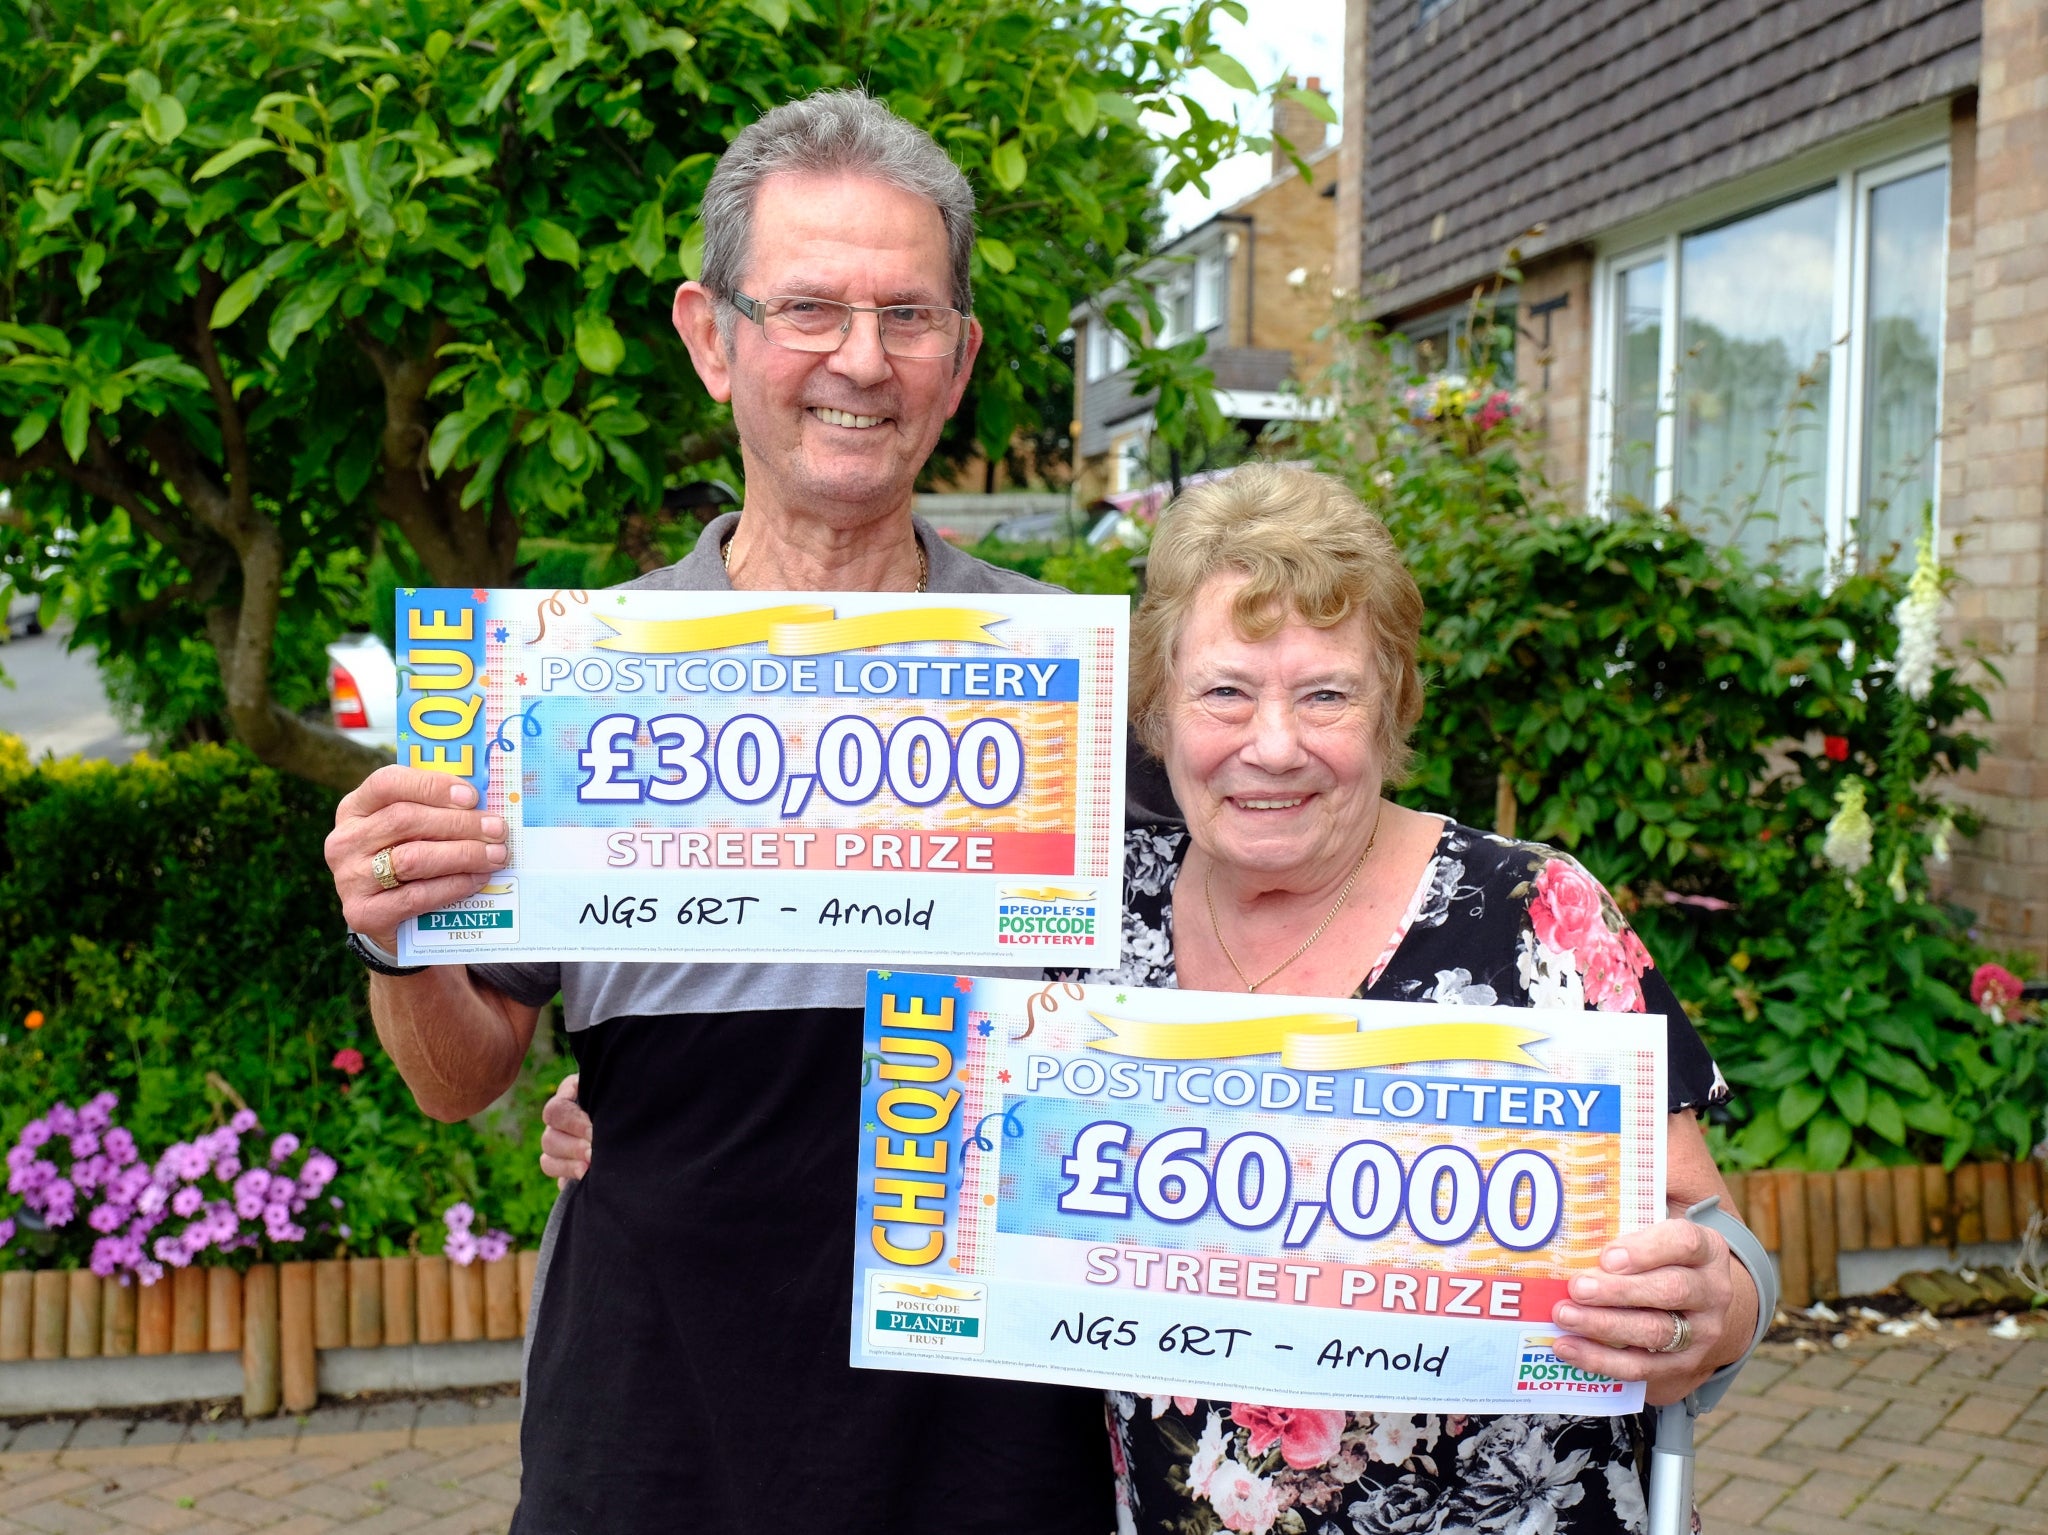 Denise Bell, 71, and Alan Shaw, 74, won a combined £90,000